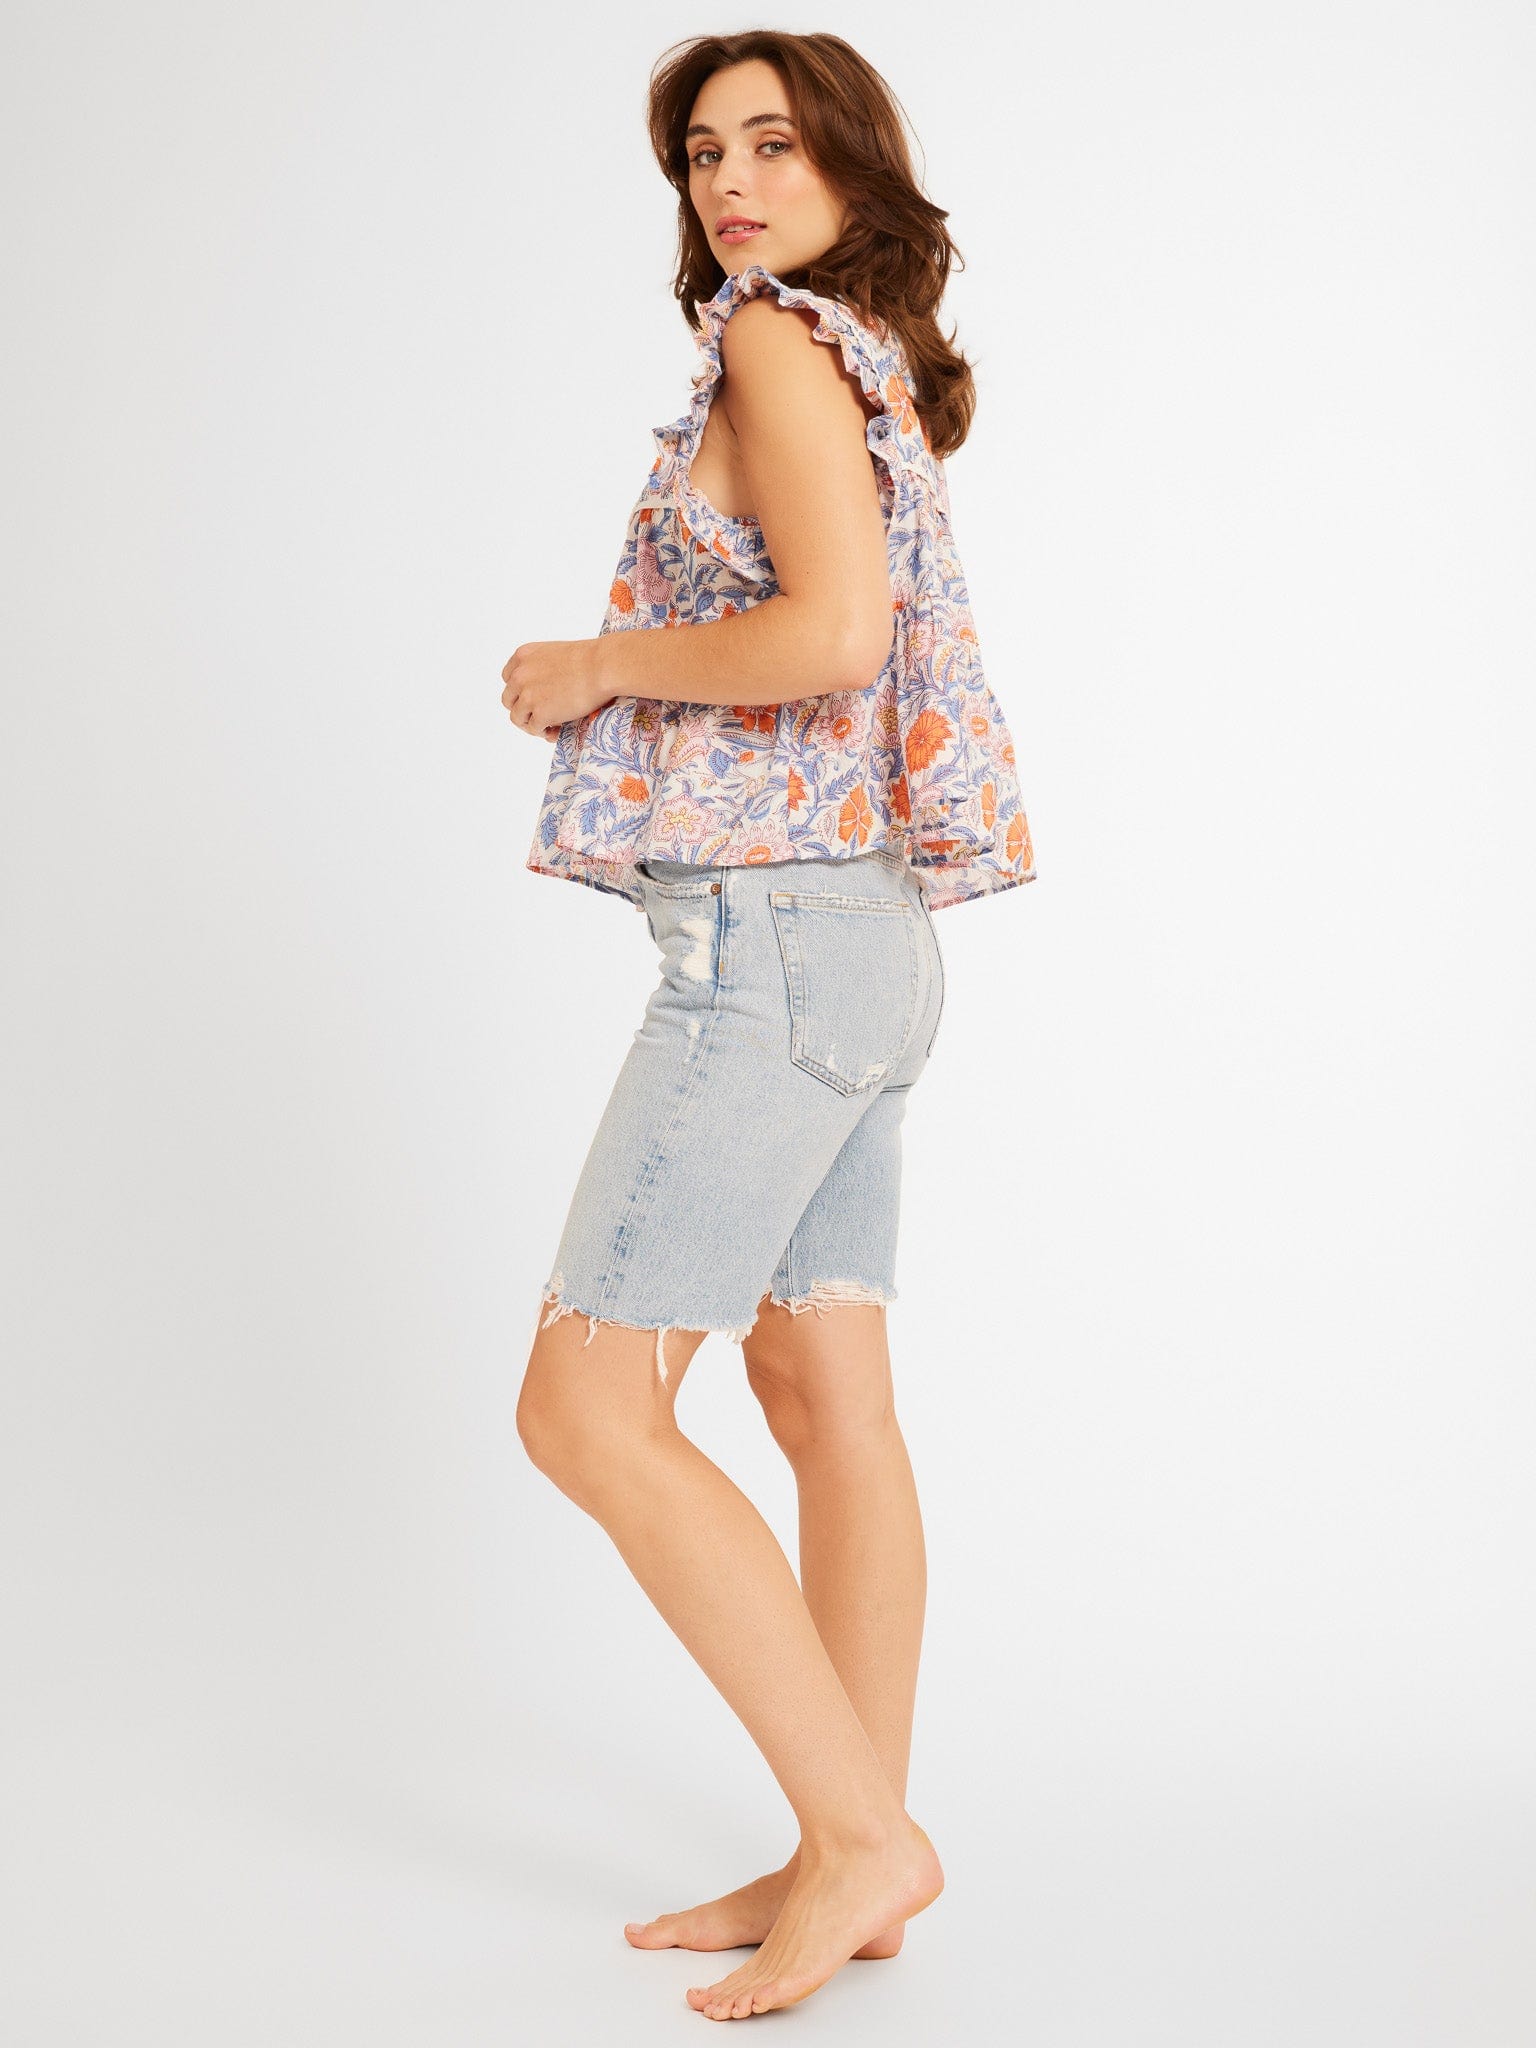 MILLE Clothing Chelsea Top in Newport Floral